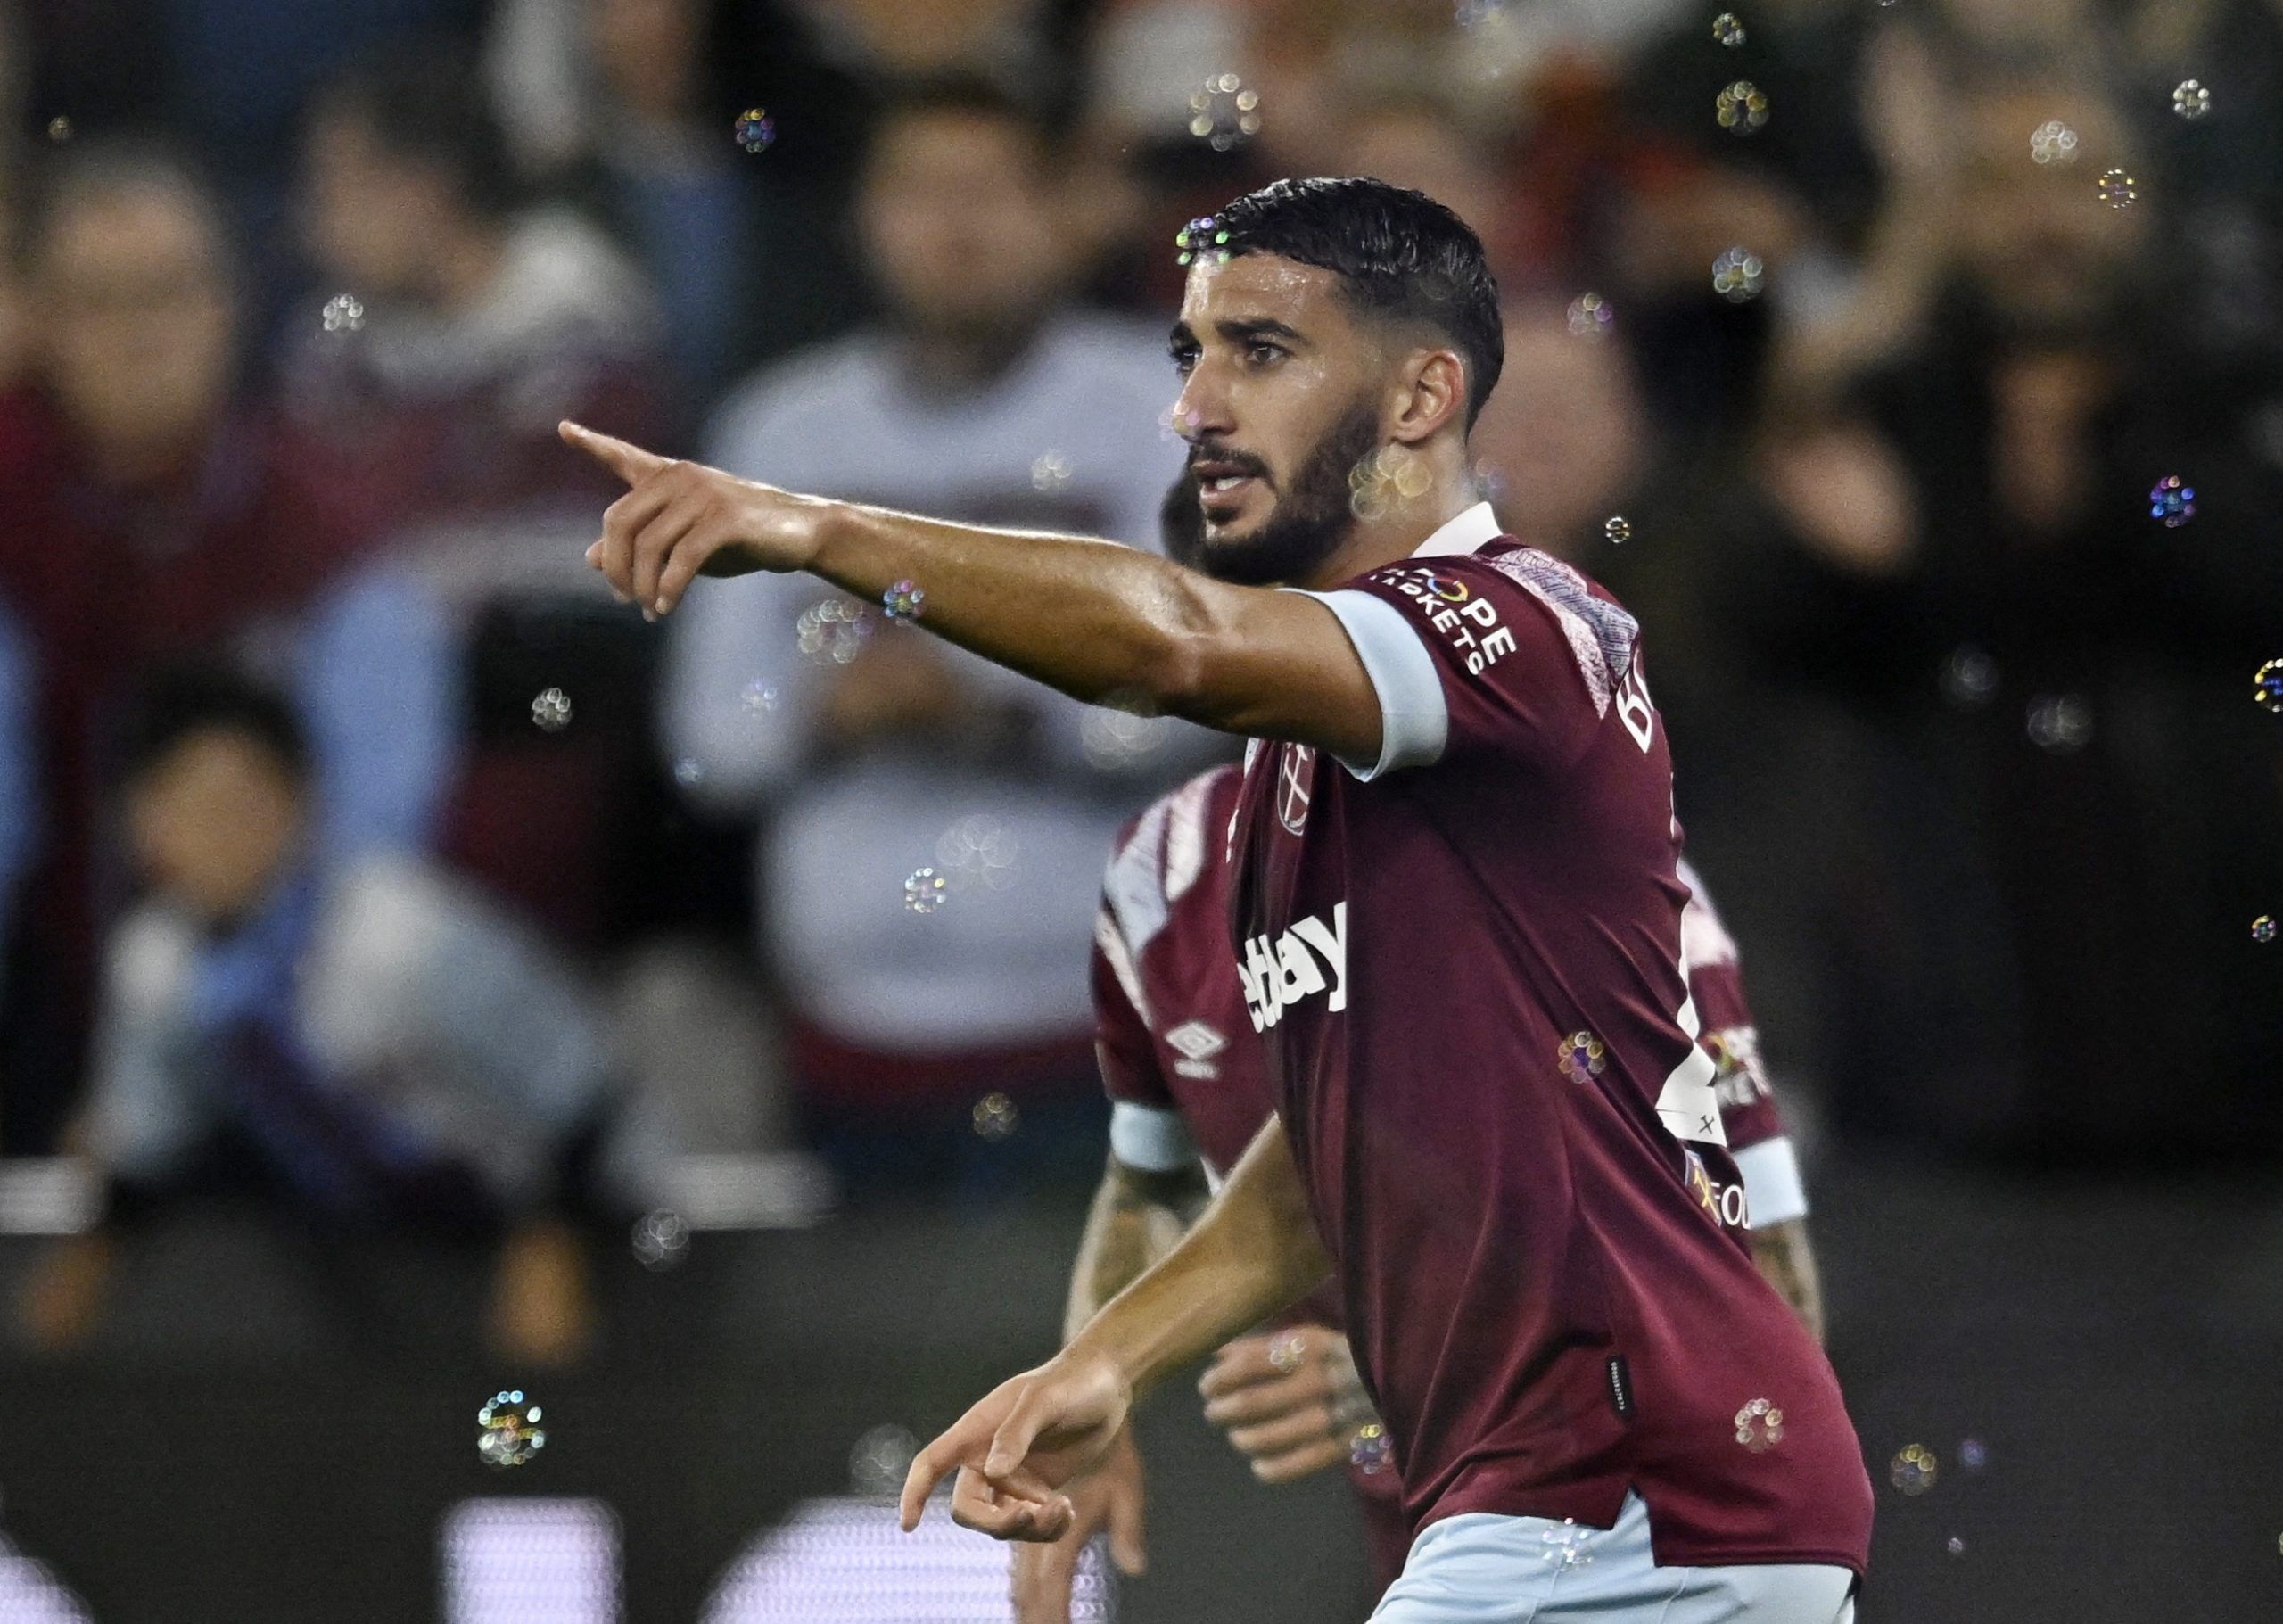 West Ham: Said Benrahma must prove himself to Moyes -Follow up